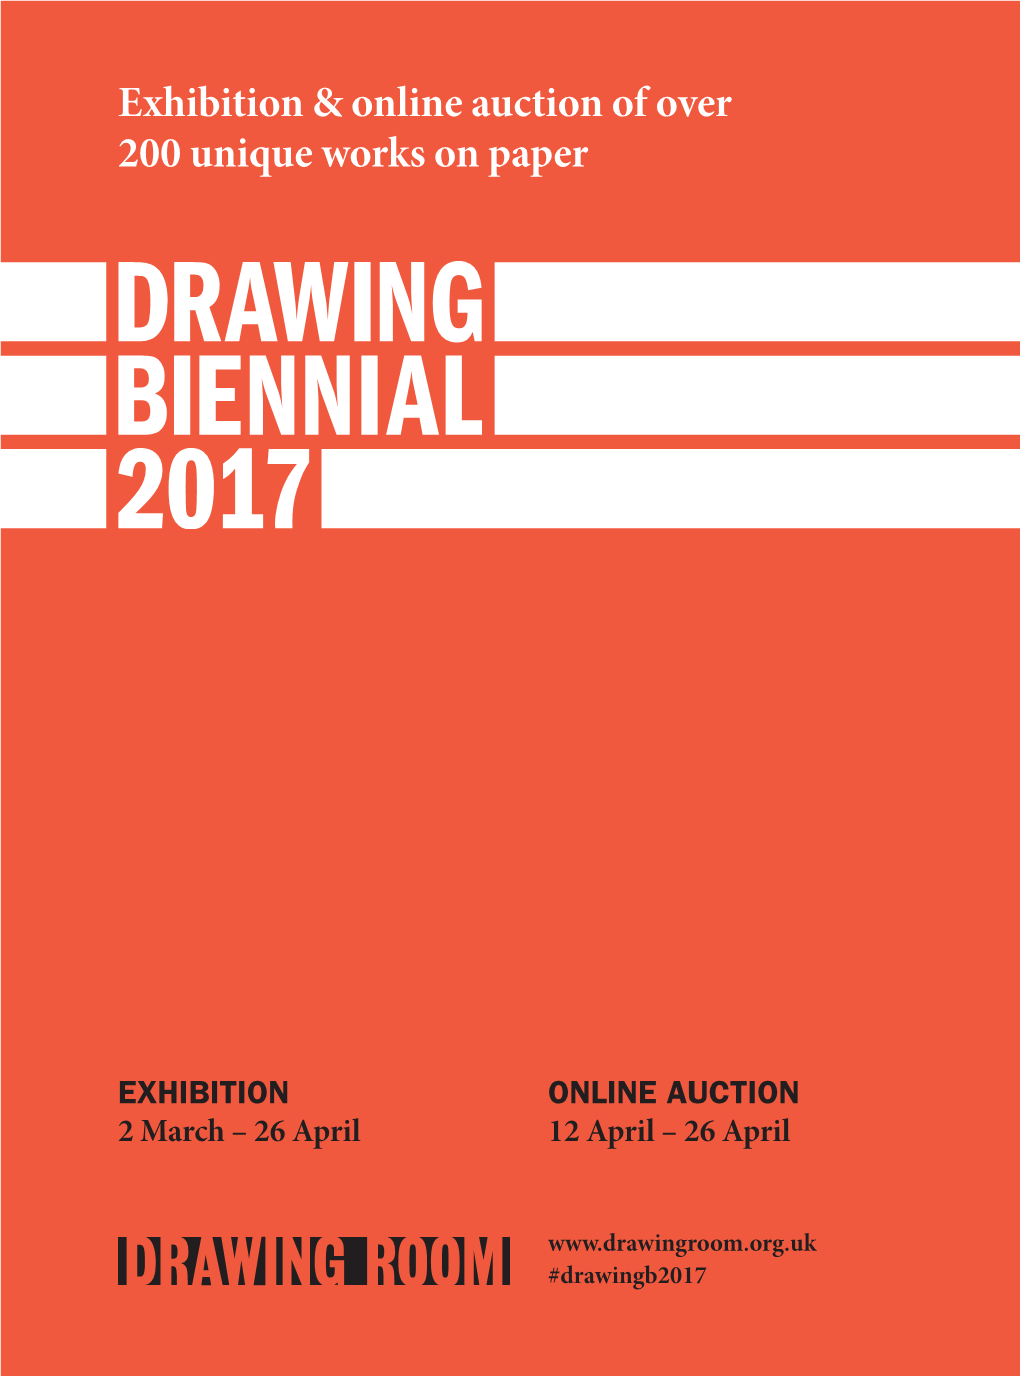 Exhibition & Online Auction of Over 200 Unique Works on Paper